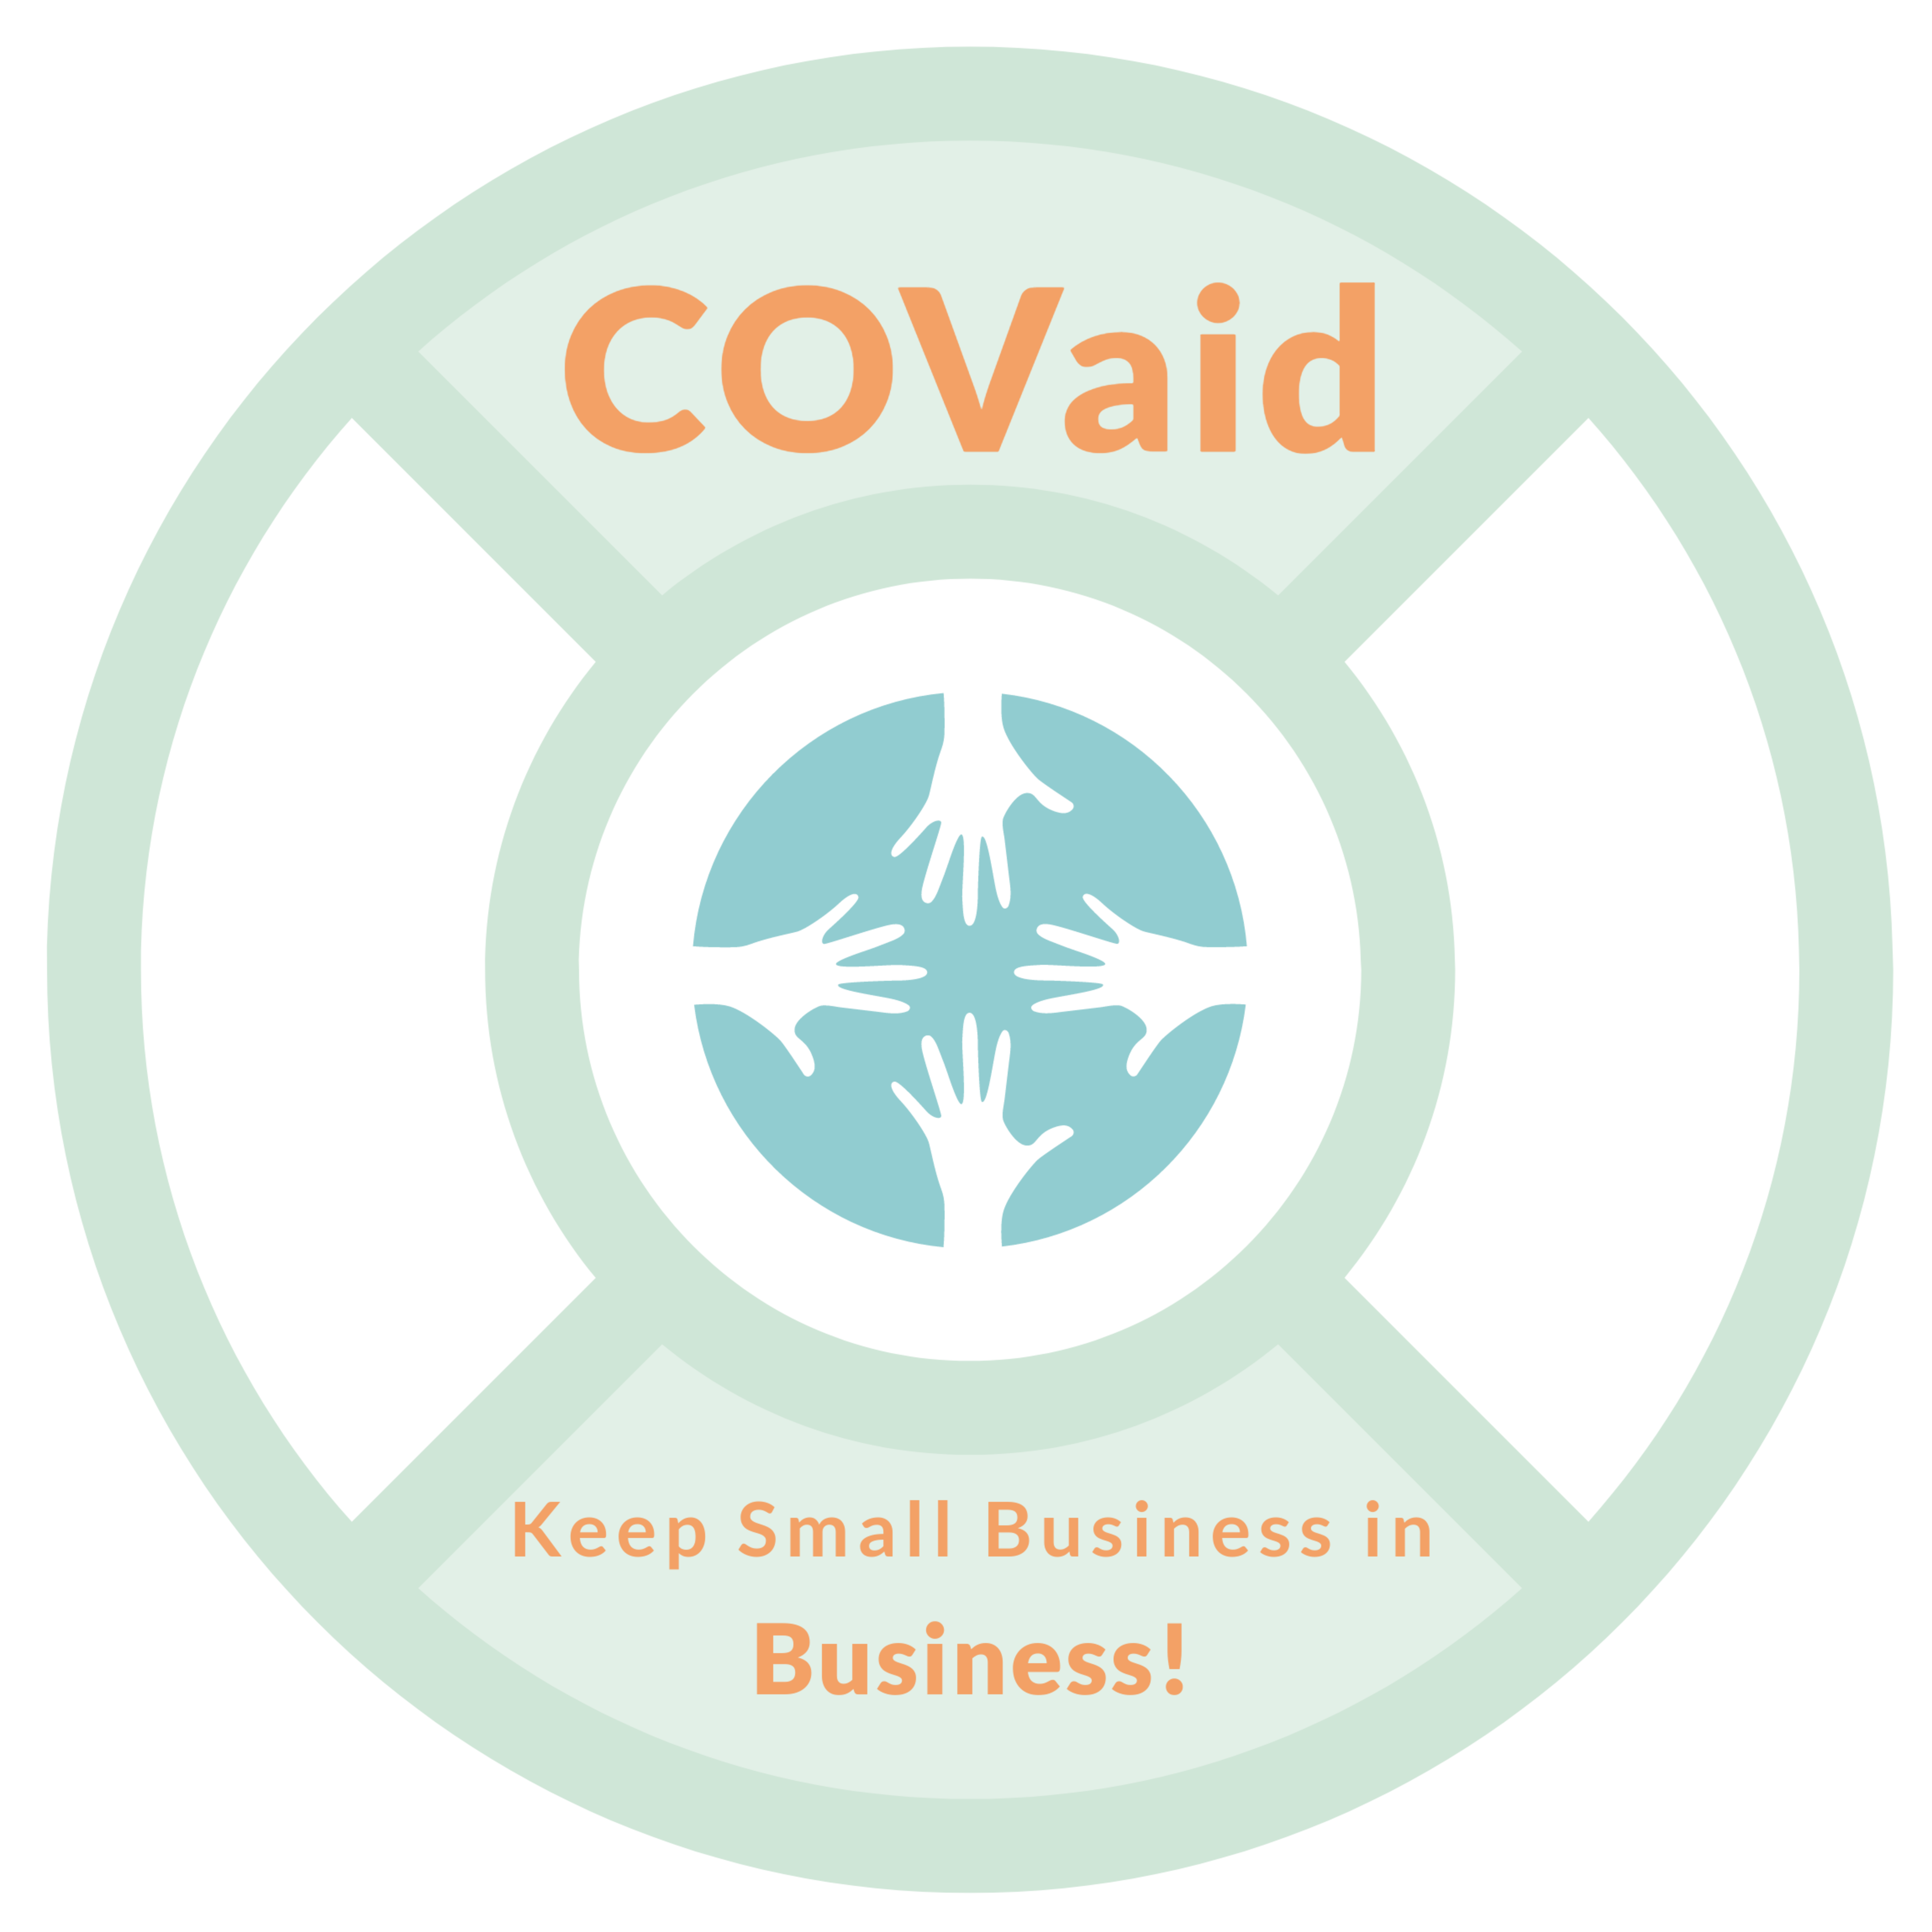 CROWDFUNDING STARTUP, BEAUTY BACKER, INTRODUCES NEW "COVAID" CATEGORY ALLOWING SMALL BUSINESSES, IMPACTED BY THE CORONAVIRUS, TO COLLECT DONATIONS WITH ZERO FEES.